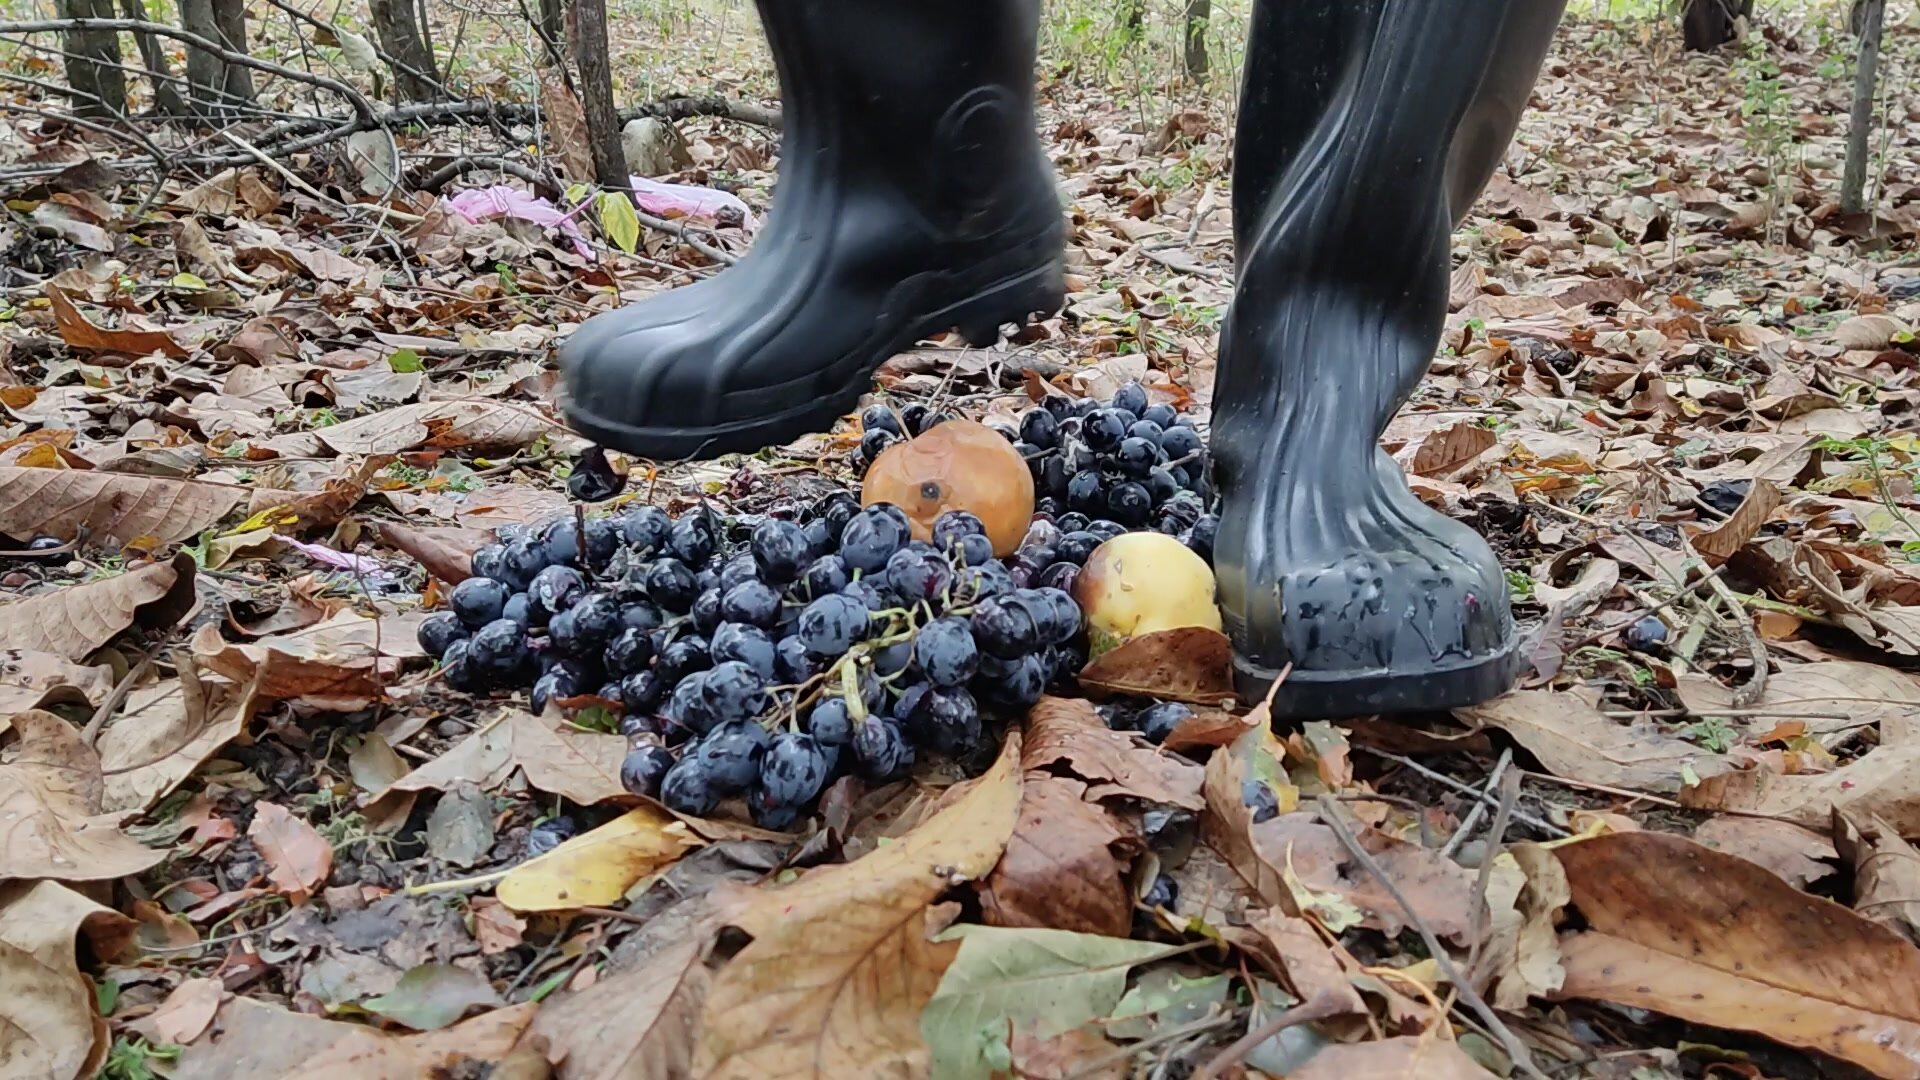 Rubber boots vs fruits - video 5